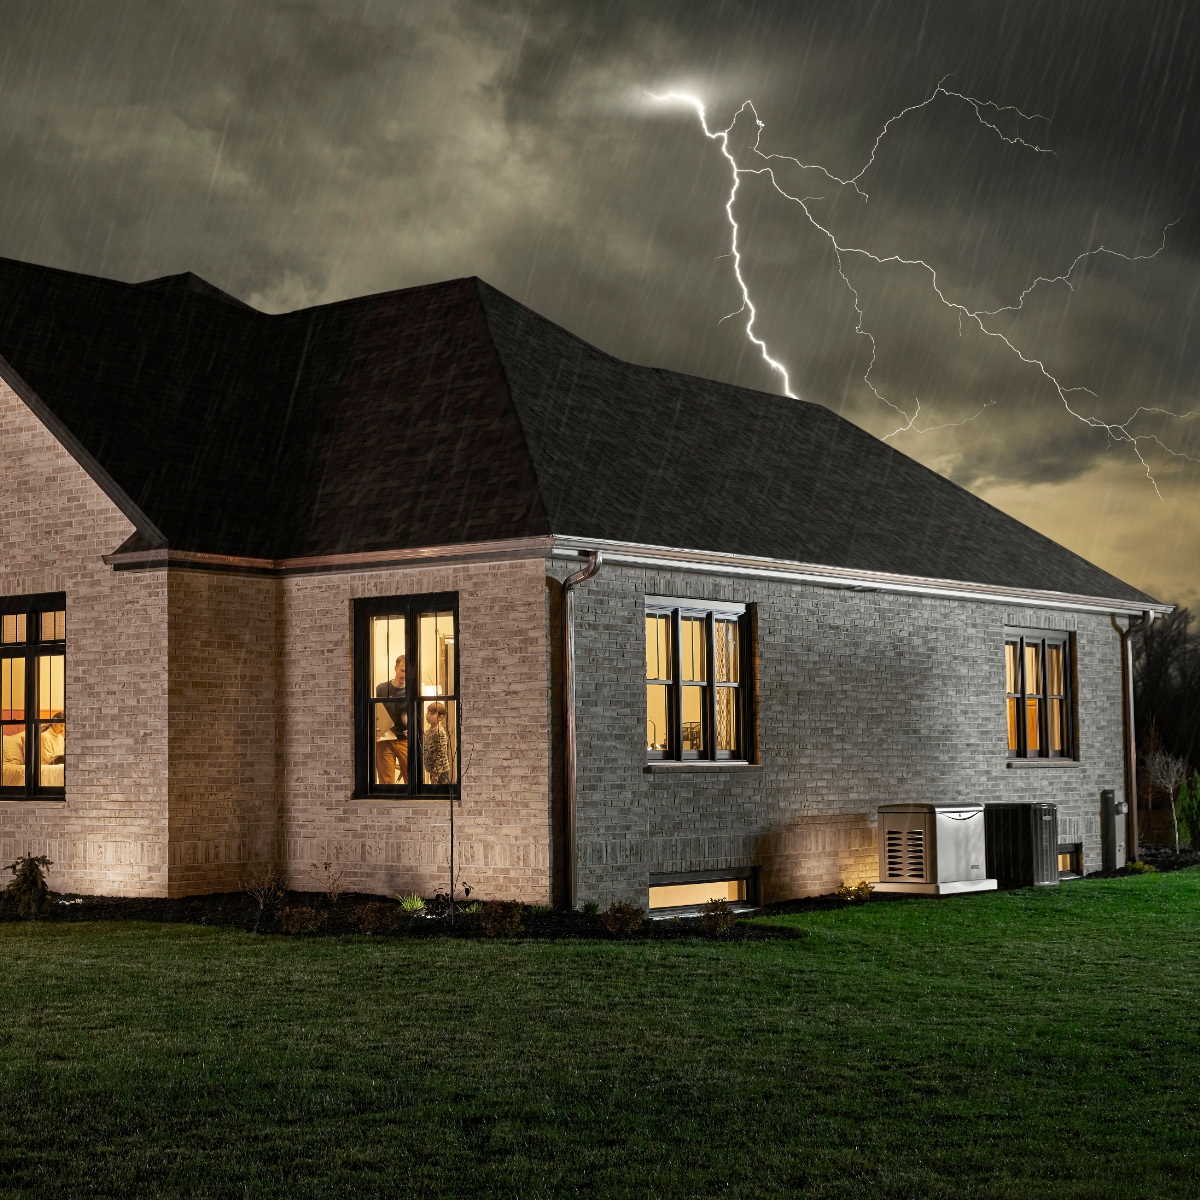 A large brick house with a Kohler generator along a wall in a residential neighborhood at night with a storm and lightning outside and the lights on inside.
DAM # aae55554
Article [5] 1:1 How a Home Generator Can Help Save You Money